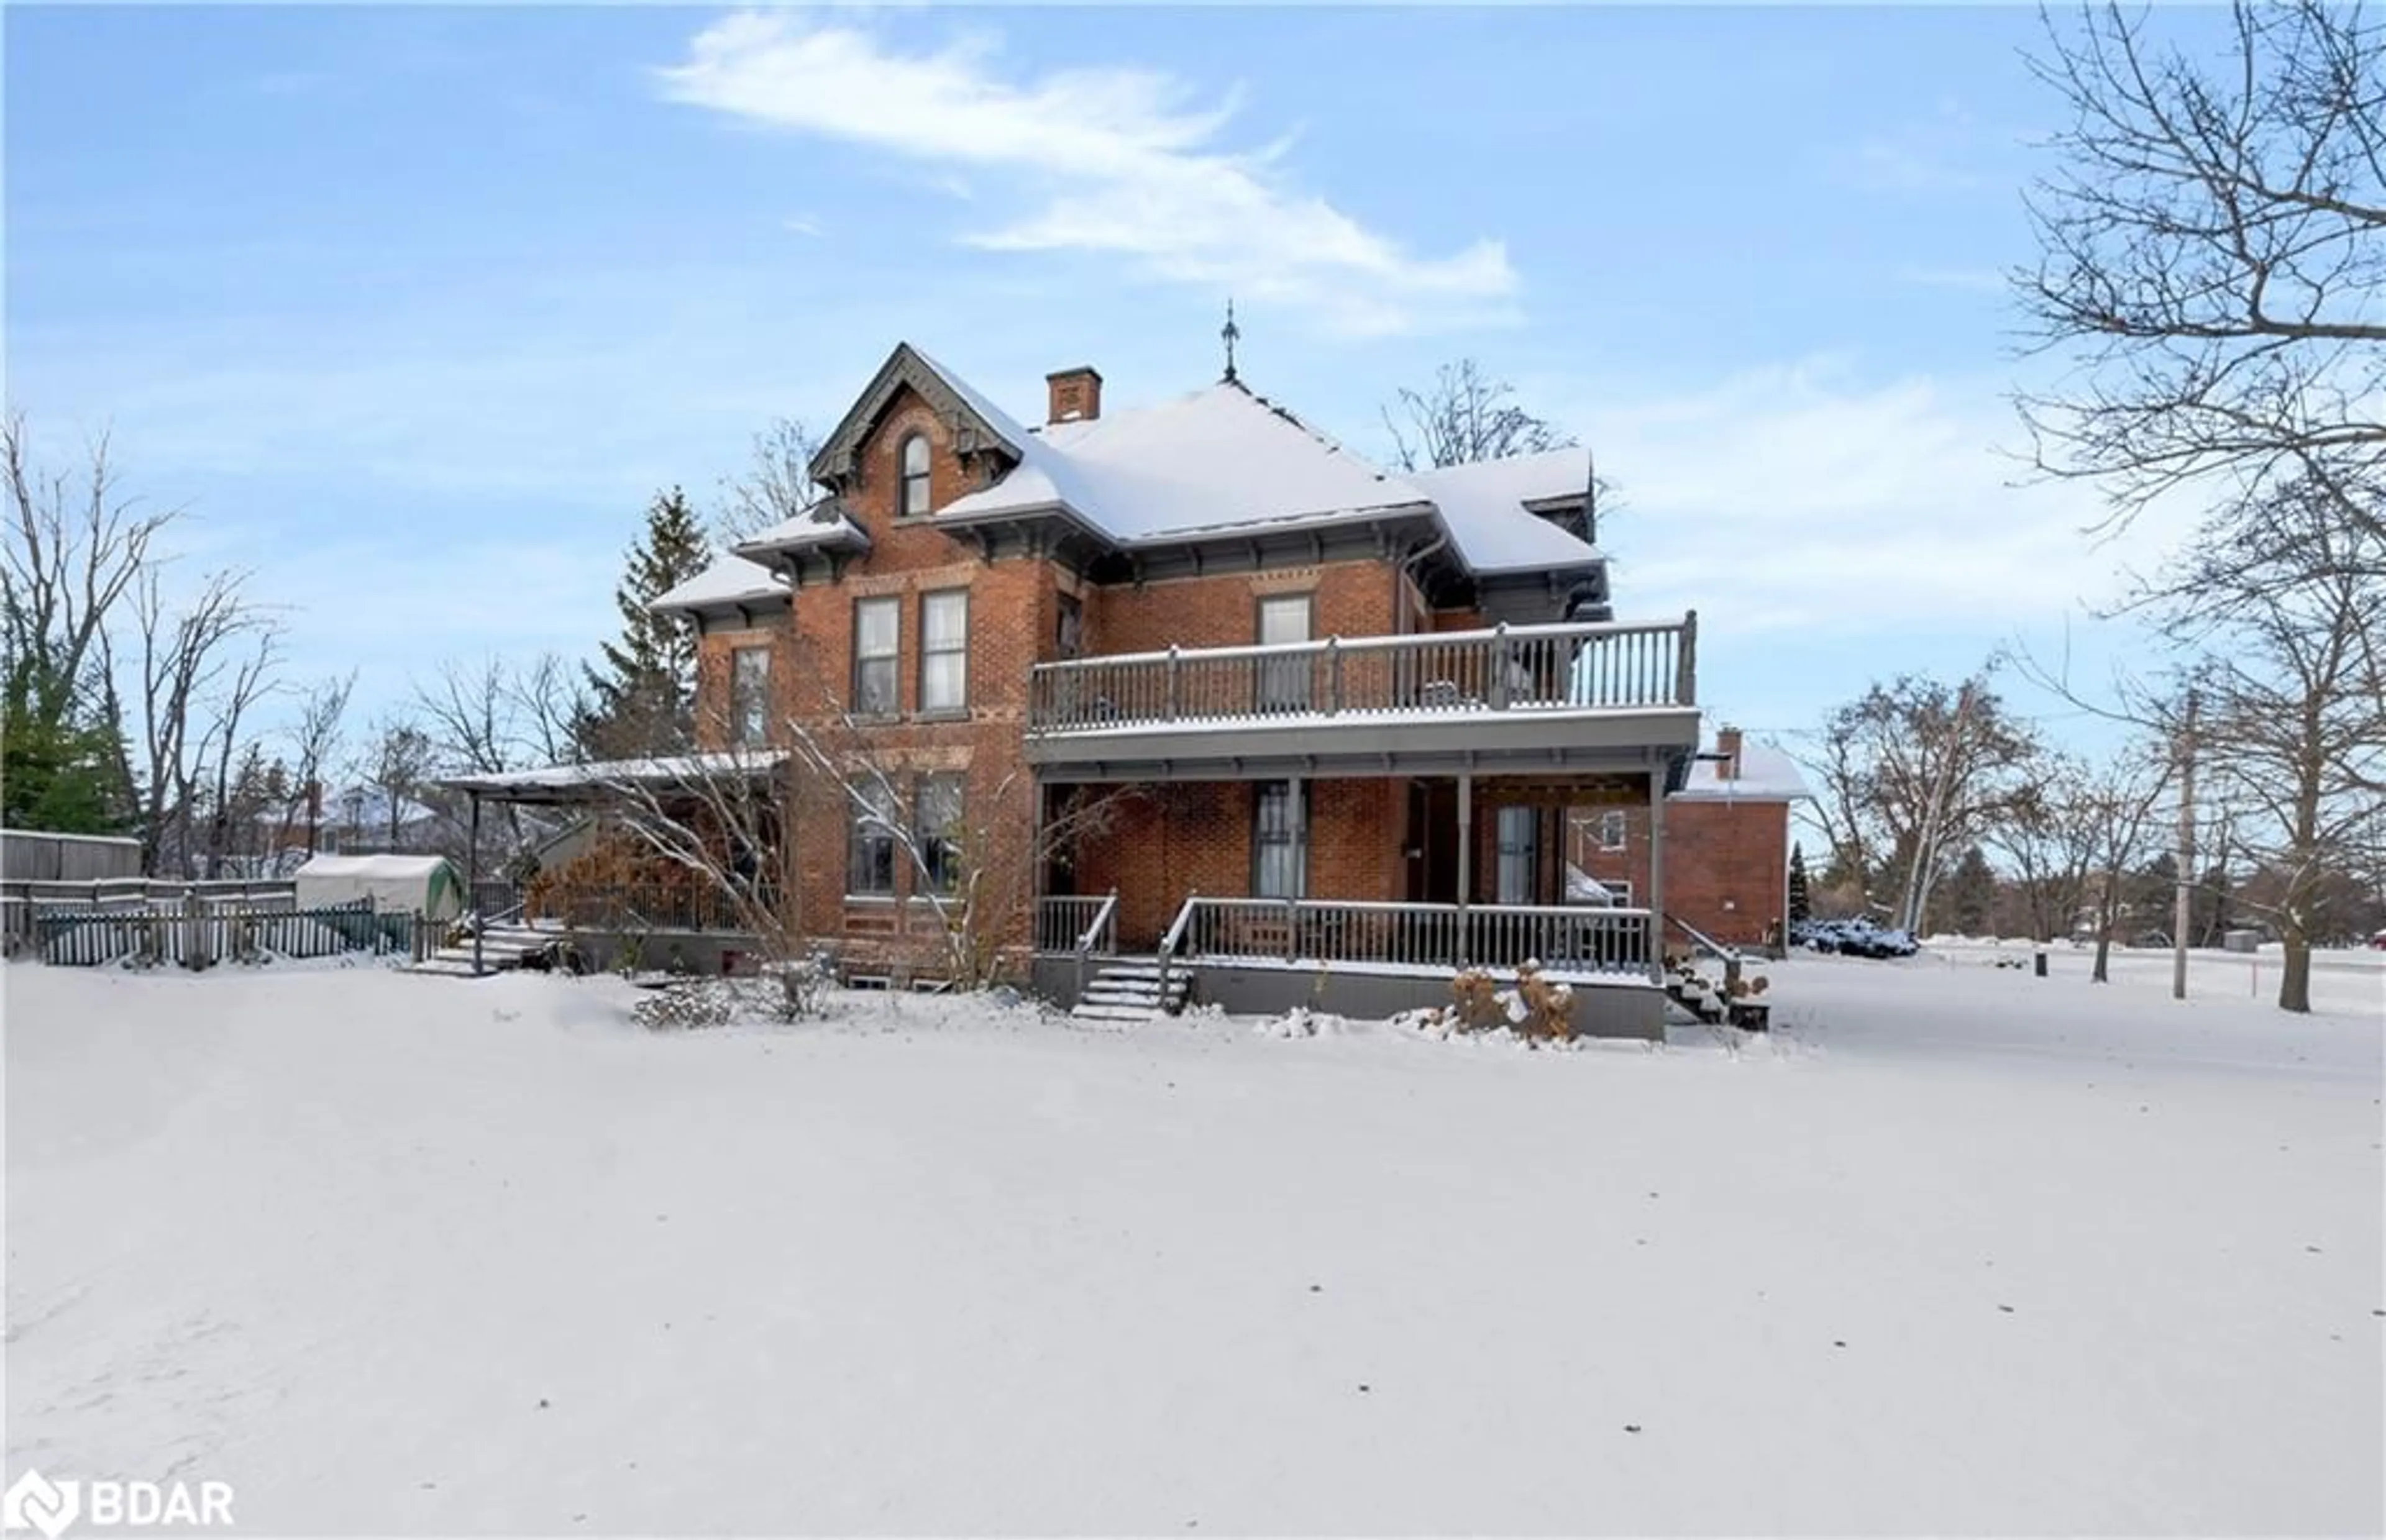 Outside view for 63 Bridge St, Meaford Ontario N4L 1B8